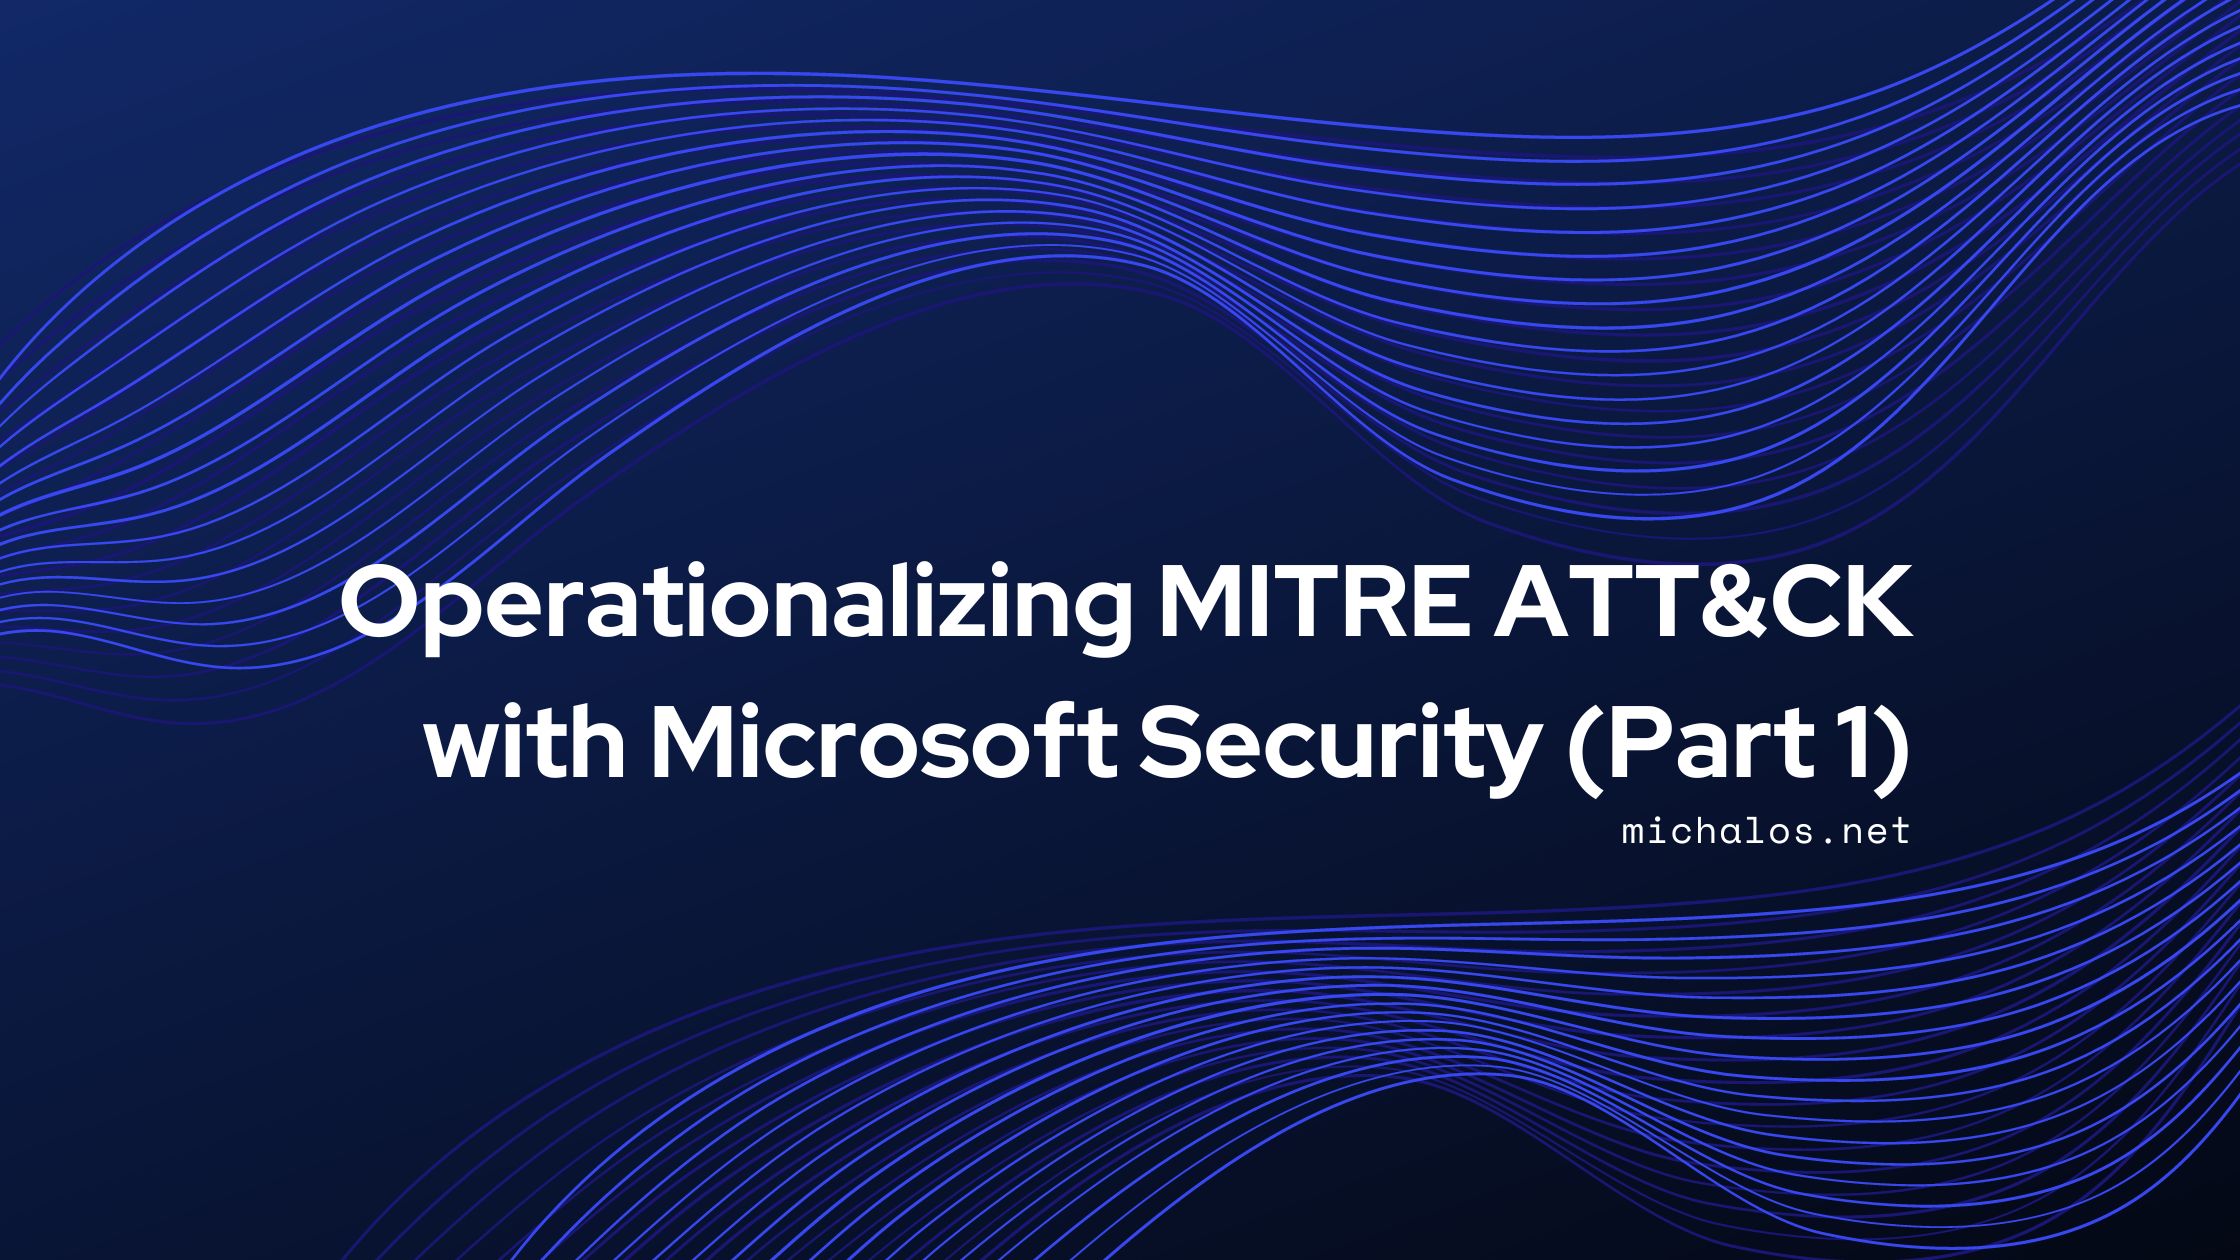 Operationalizing MITRE ATT&CK with Microsoft Security (Part 1)